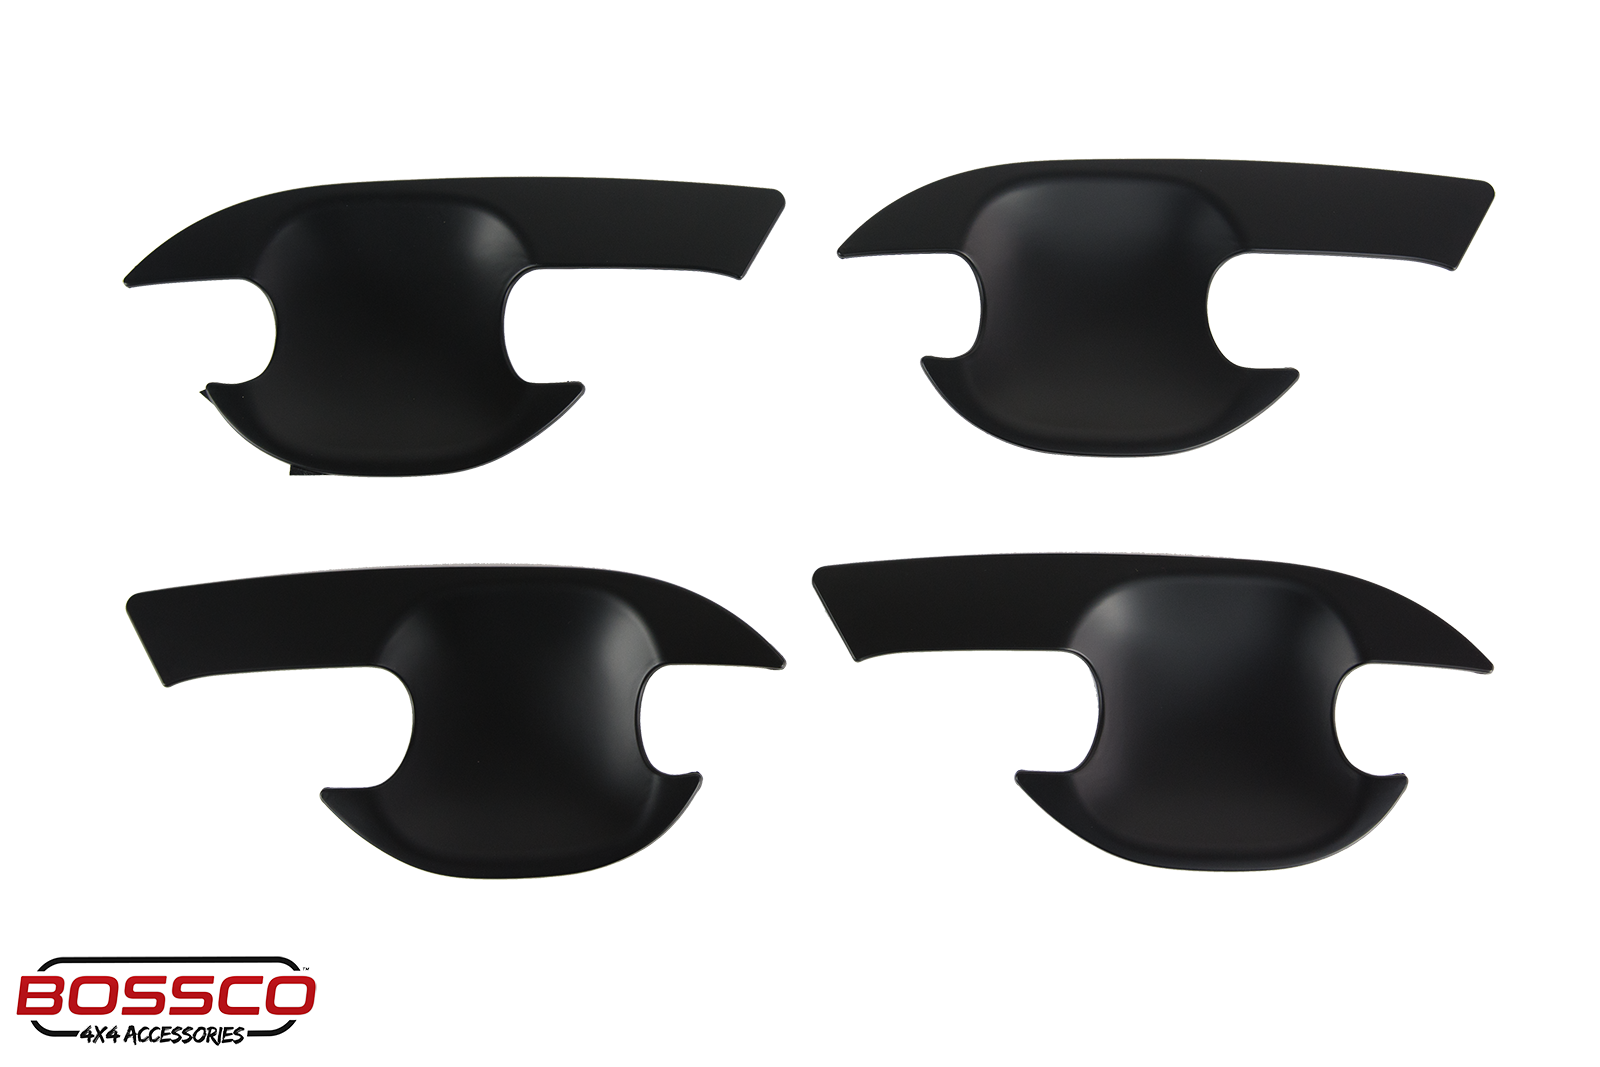 Black Door Handle Bowl Covers Protectors Suitable For Ford Ranger